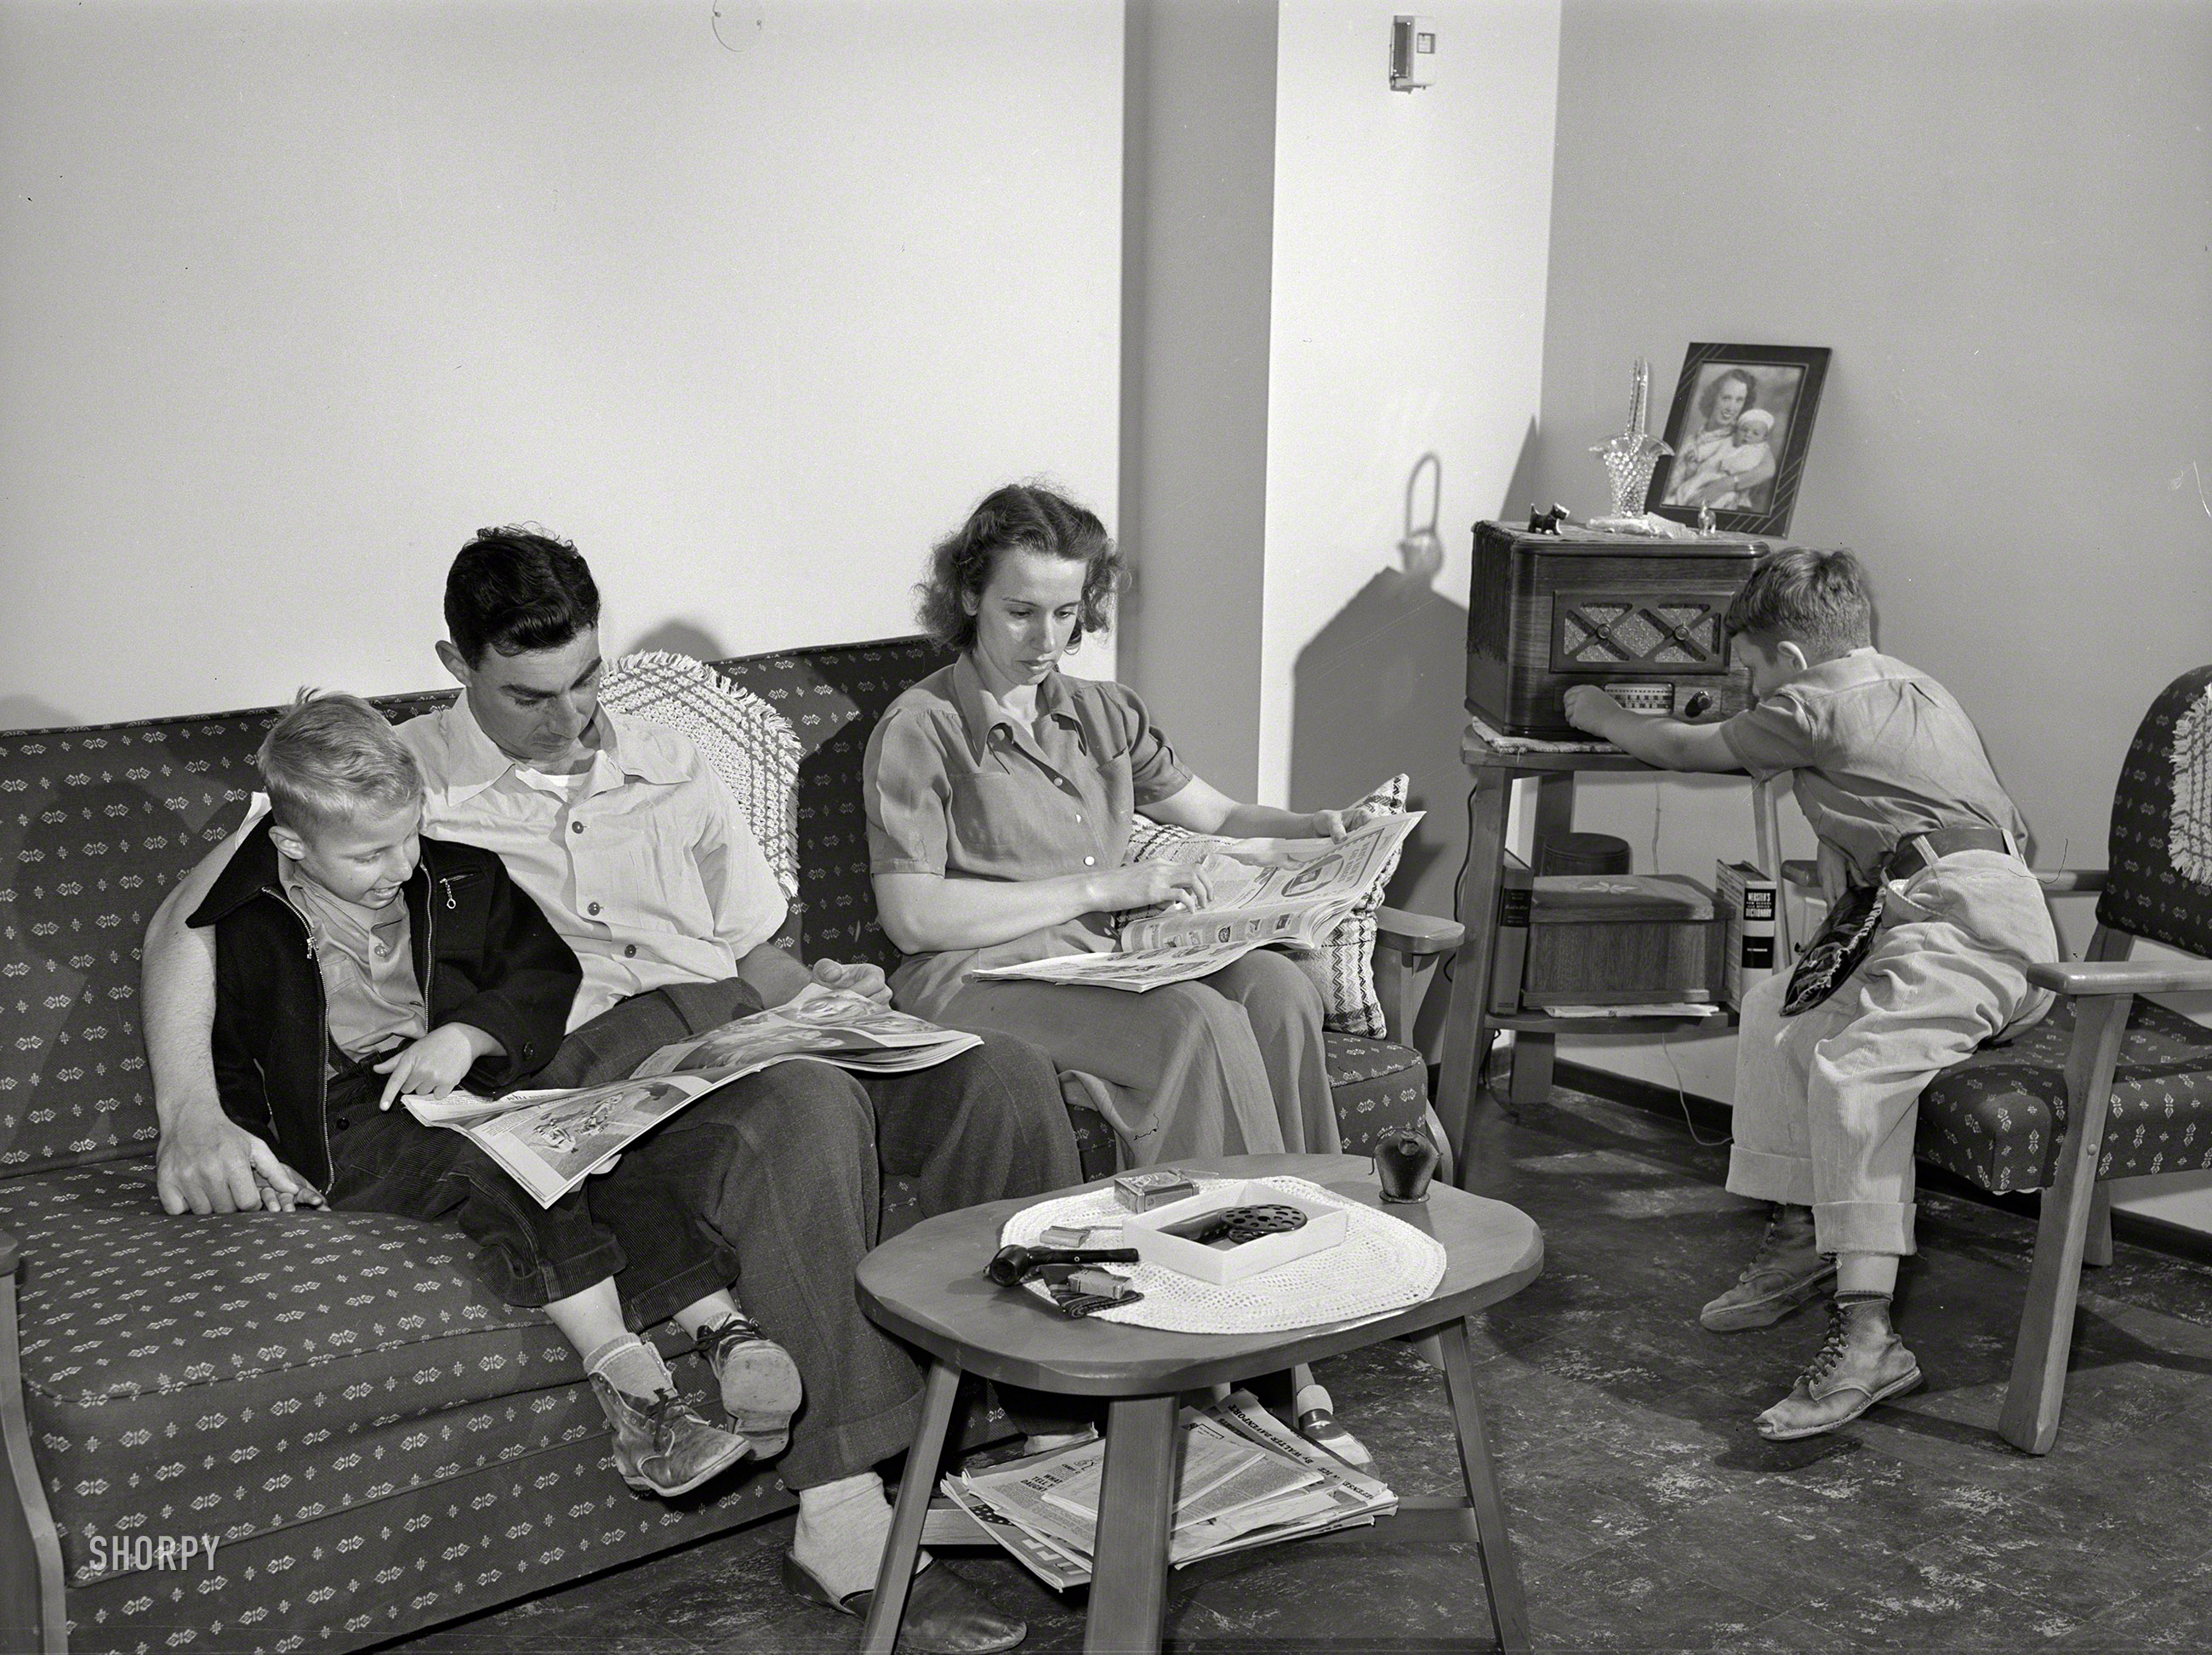 June 1941. "Family of Marine in their living room. They live in one of the units of the Navy defense housing project which is designed for Naval people, Marines and some civilian defense workers. San Diego, California." Medium format acetate negative by Russell Lee for the Farm Security Administration. View full size.